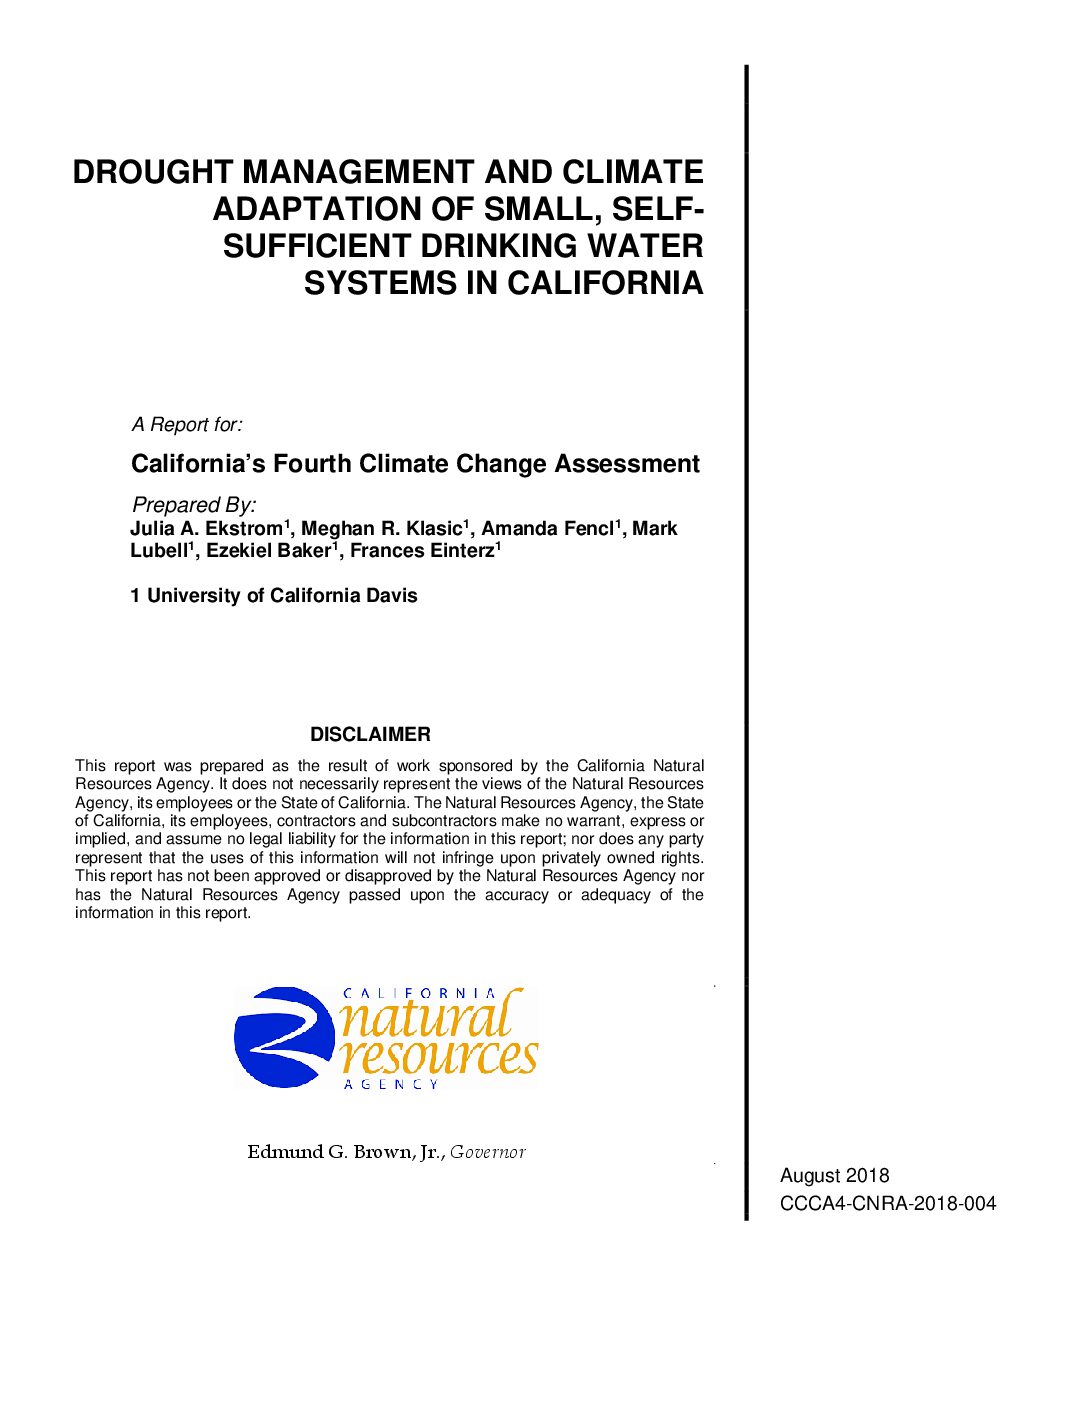 Drought Management and Climate Adaptation of Small, Self-Sufficient Drinking Water Systems in California